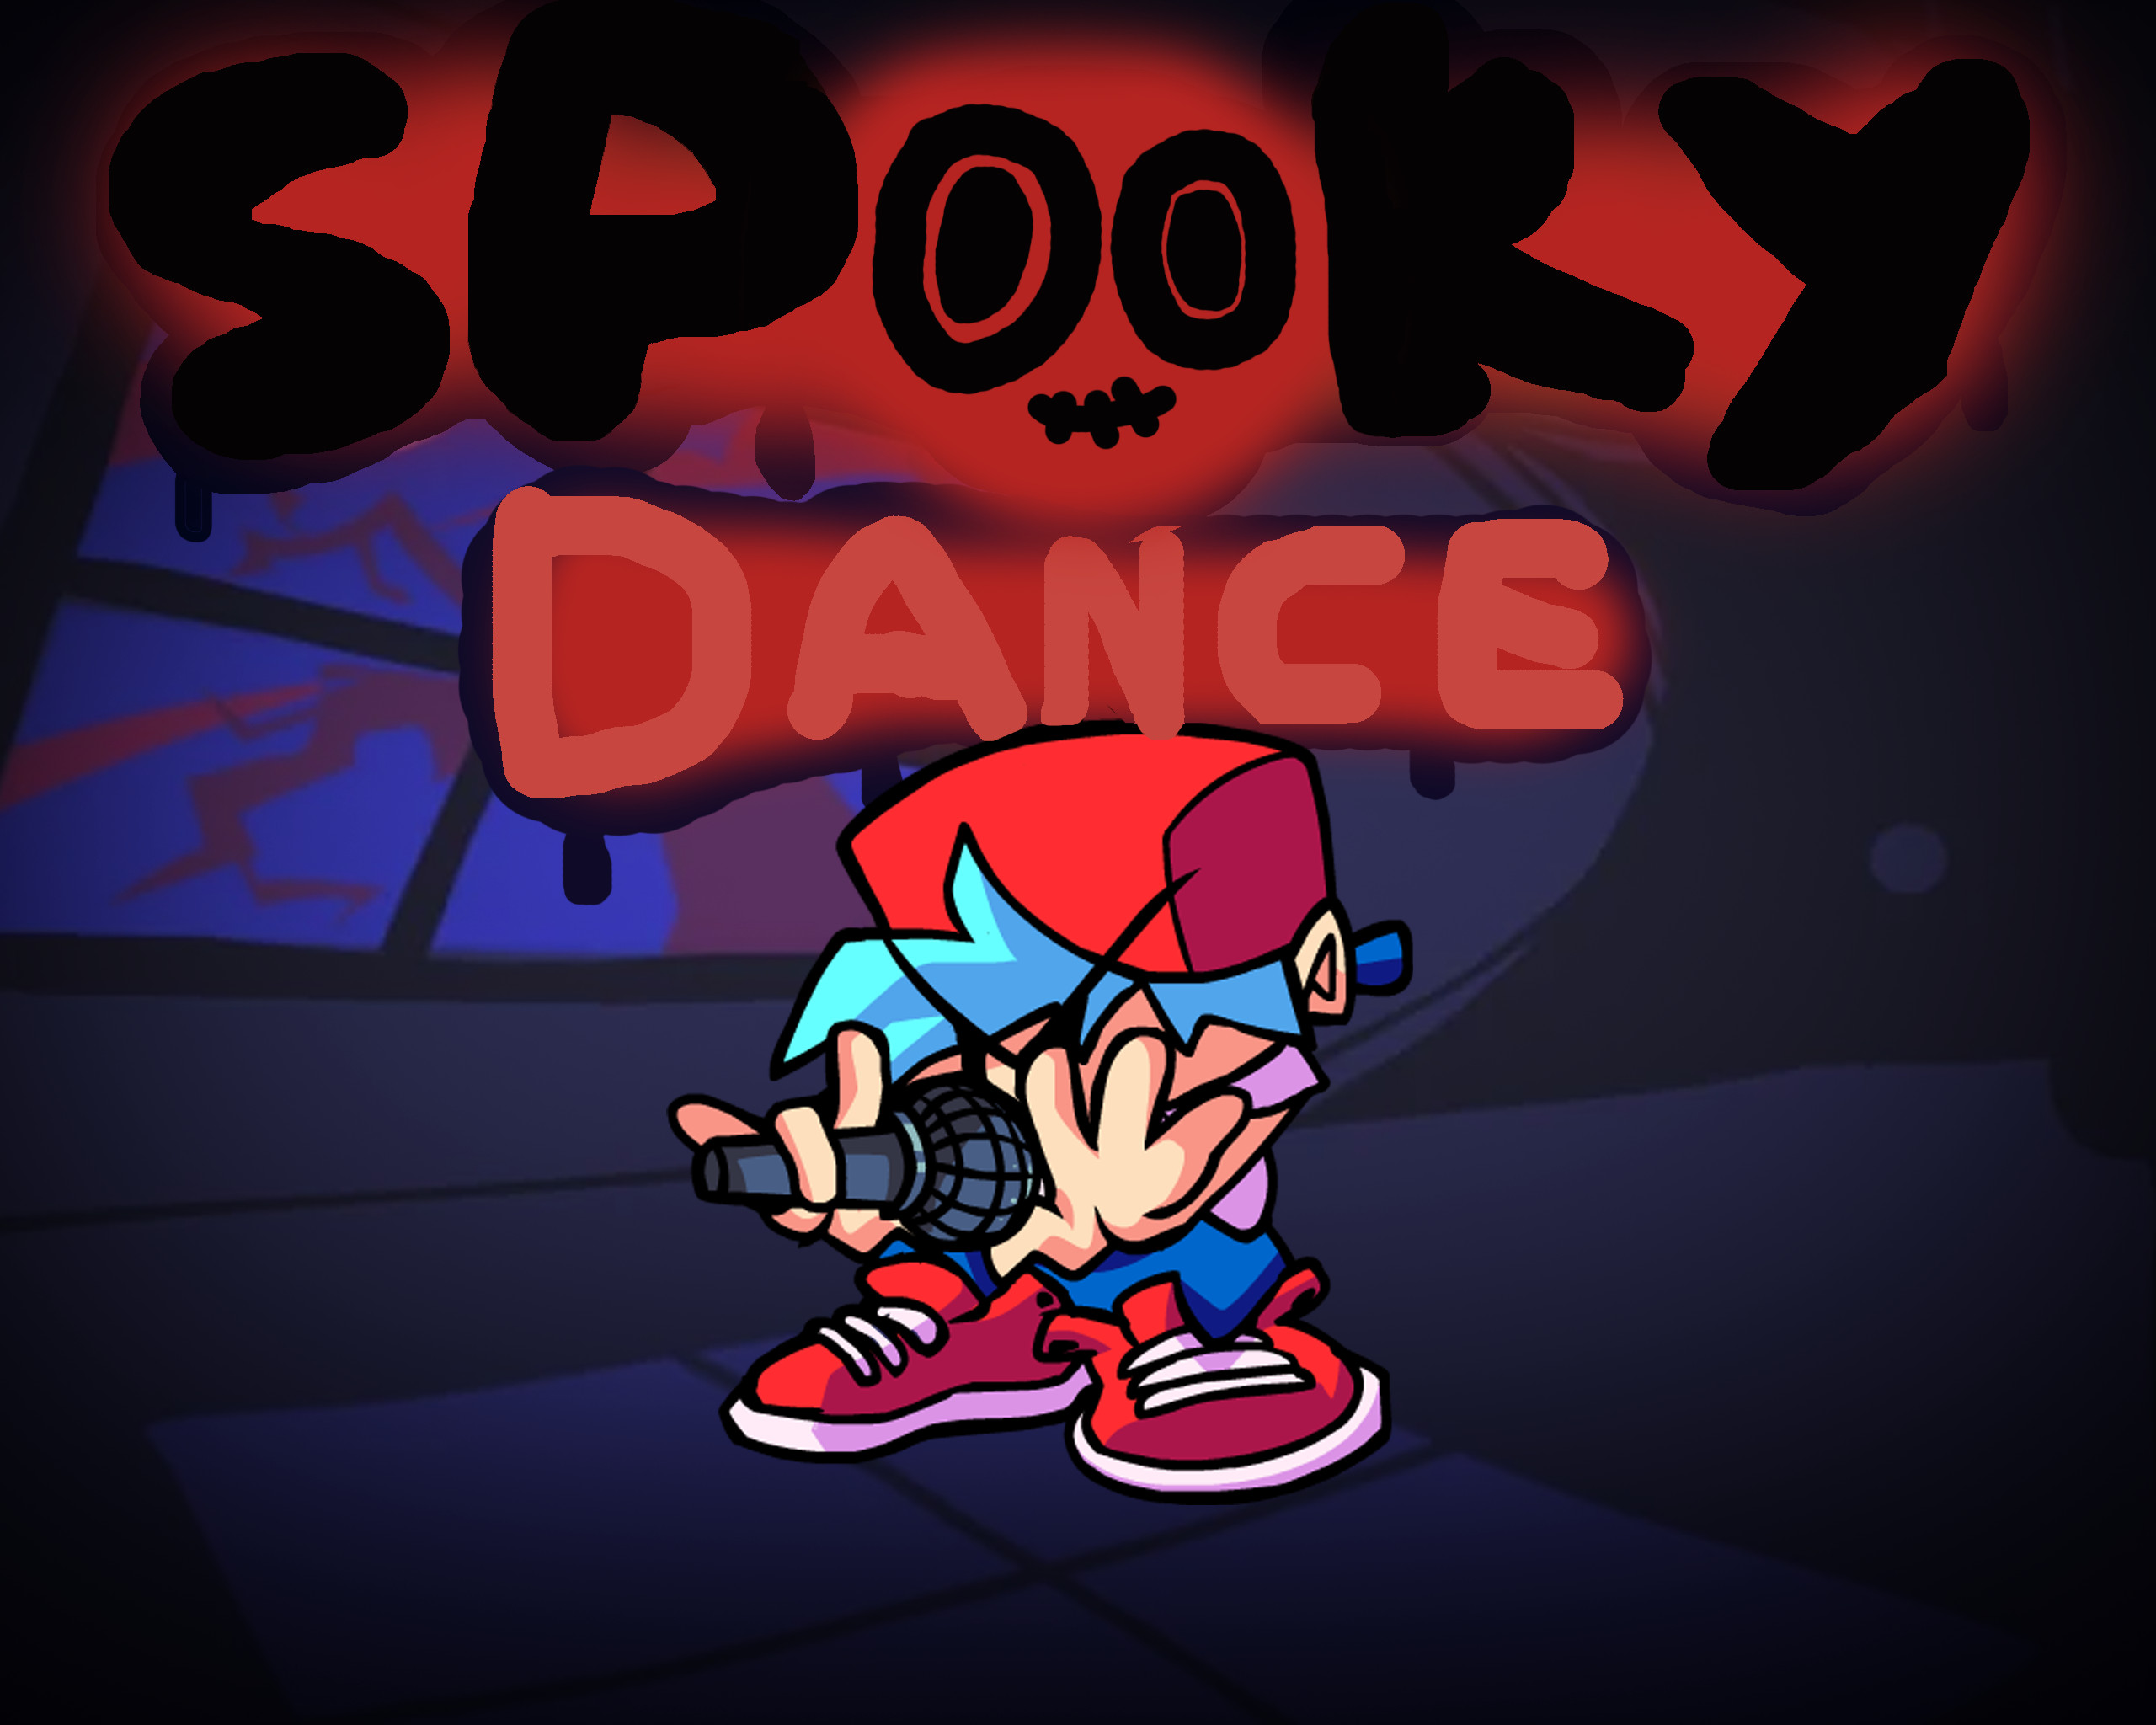 Evan and Cass doing the Spooky Dance (GIF based on Skid and Pump Friday  Night Funkin Week 2) It is Spooky Month on Valentine's Day!!! :D :  r/fivenightsatfreddys